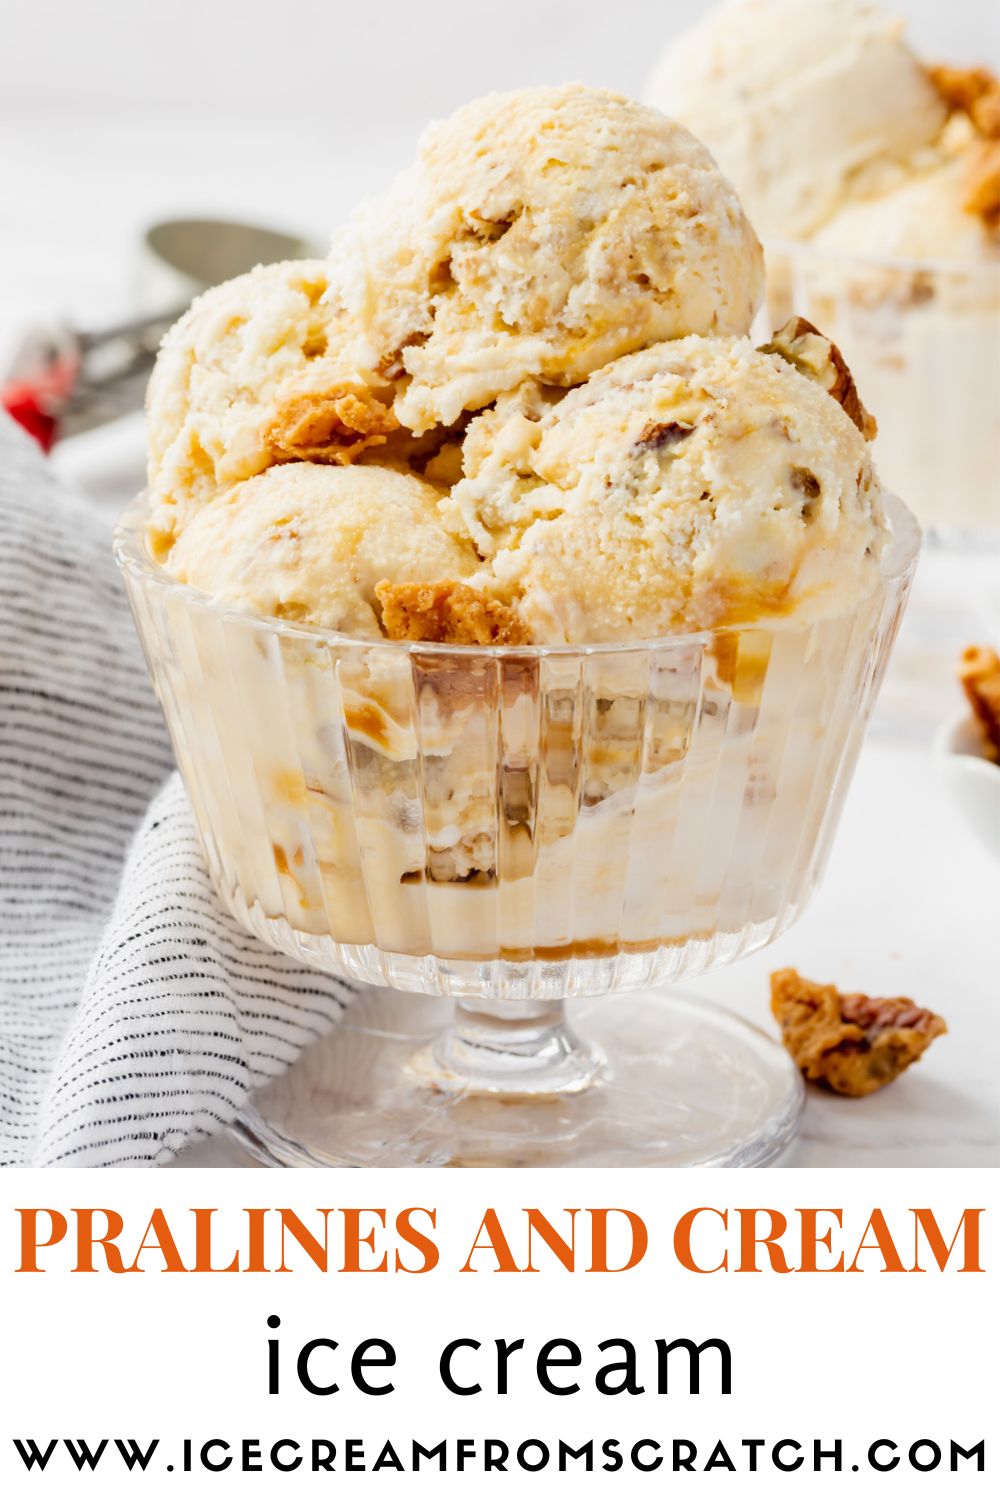 a footed dish of scooped homemade praline ice cream. Text at bottom of image says "Pralines and Cream ice cream"